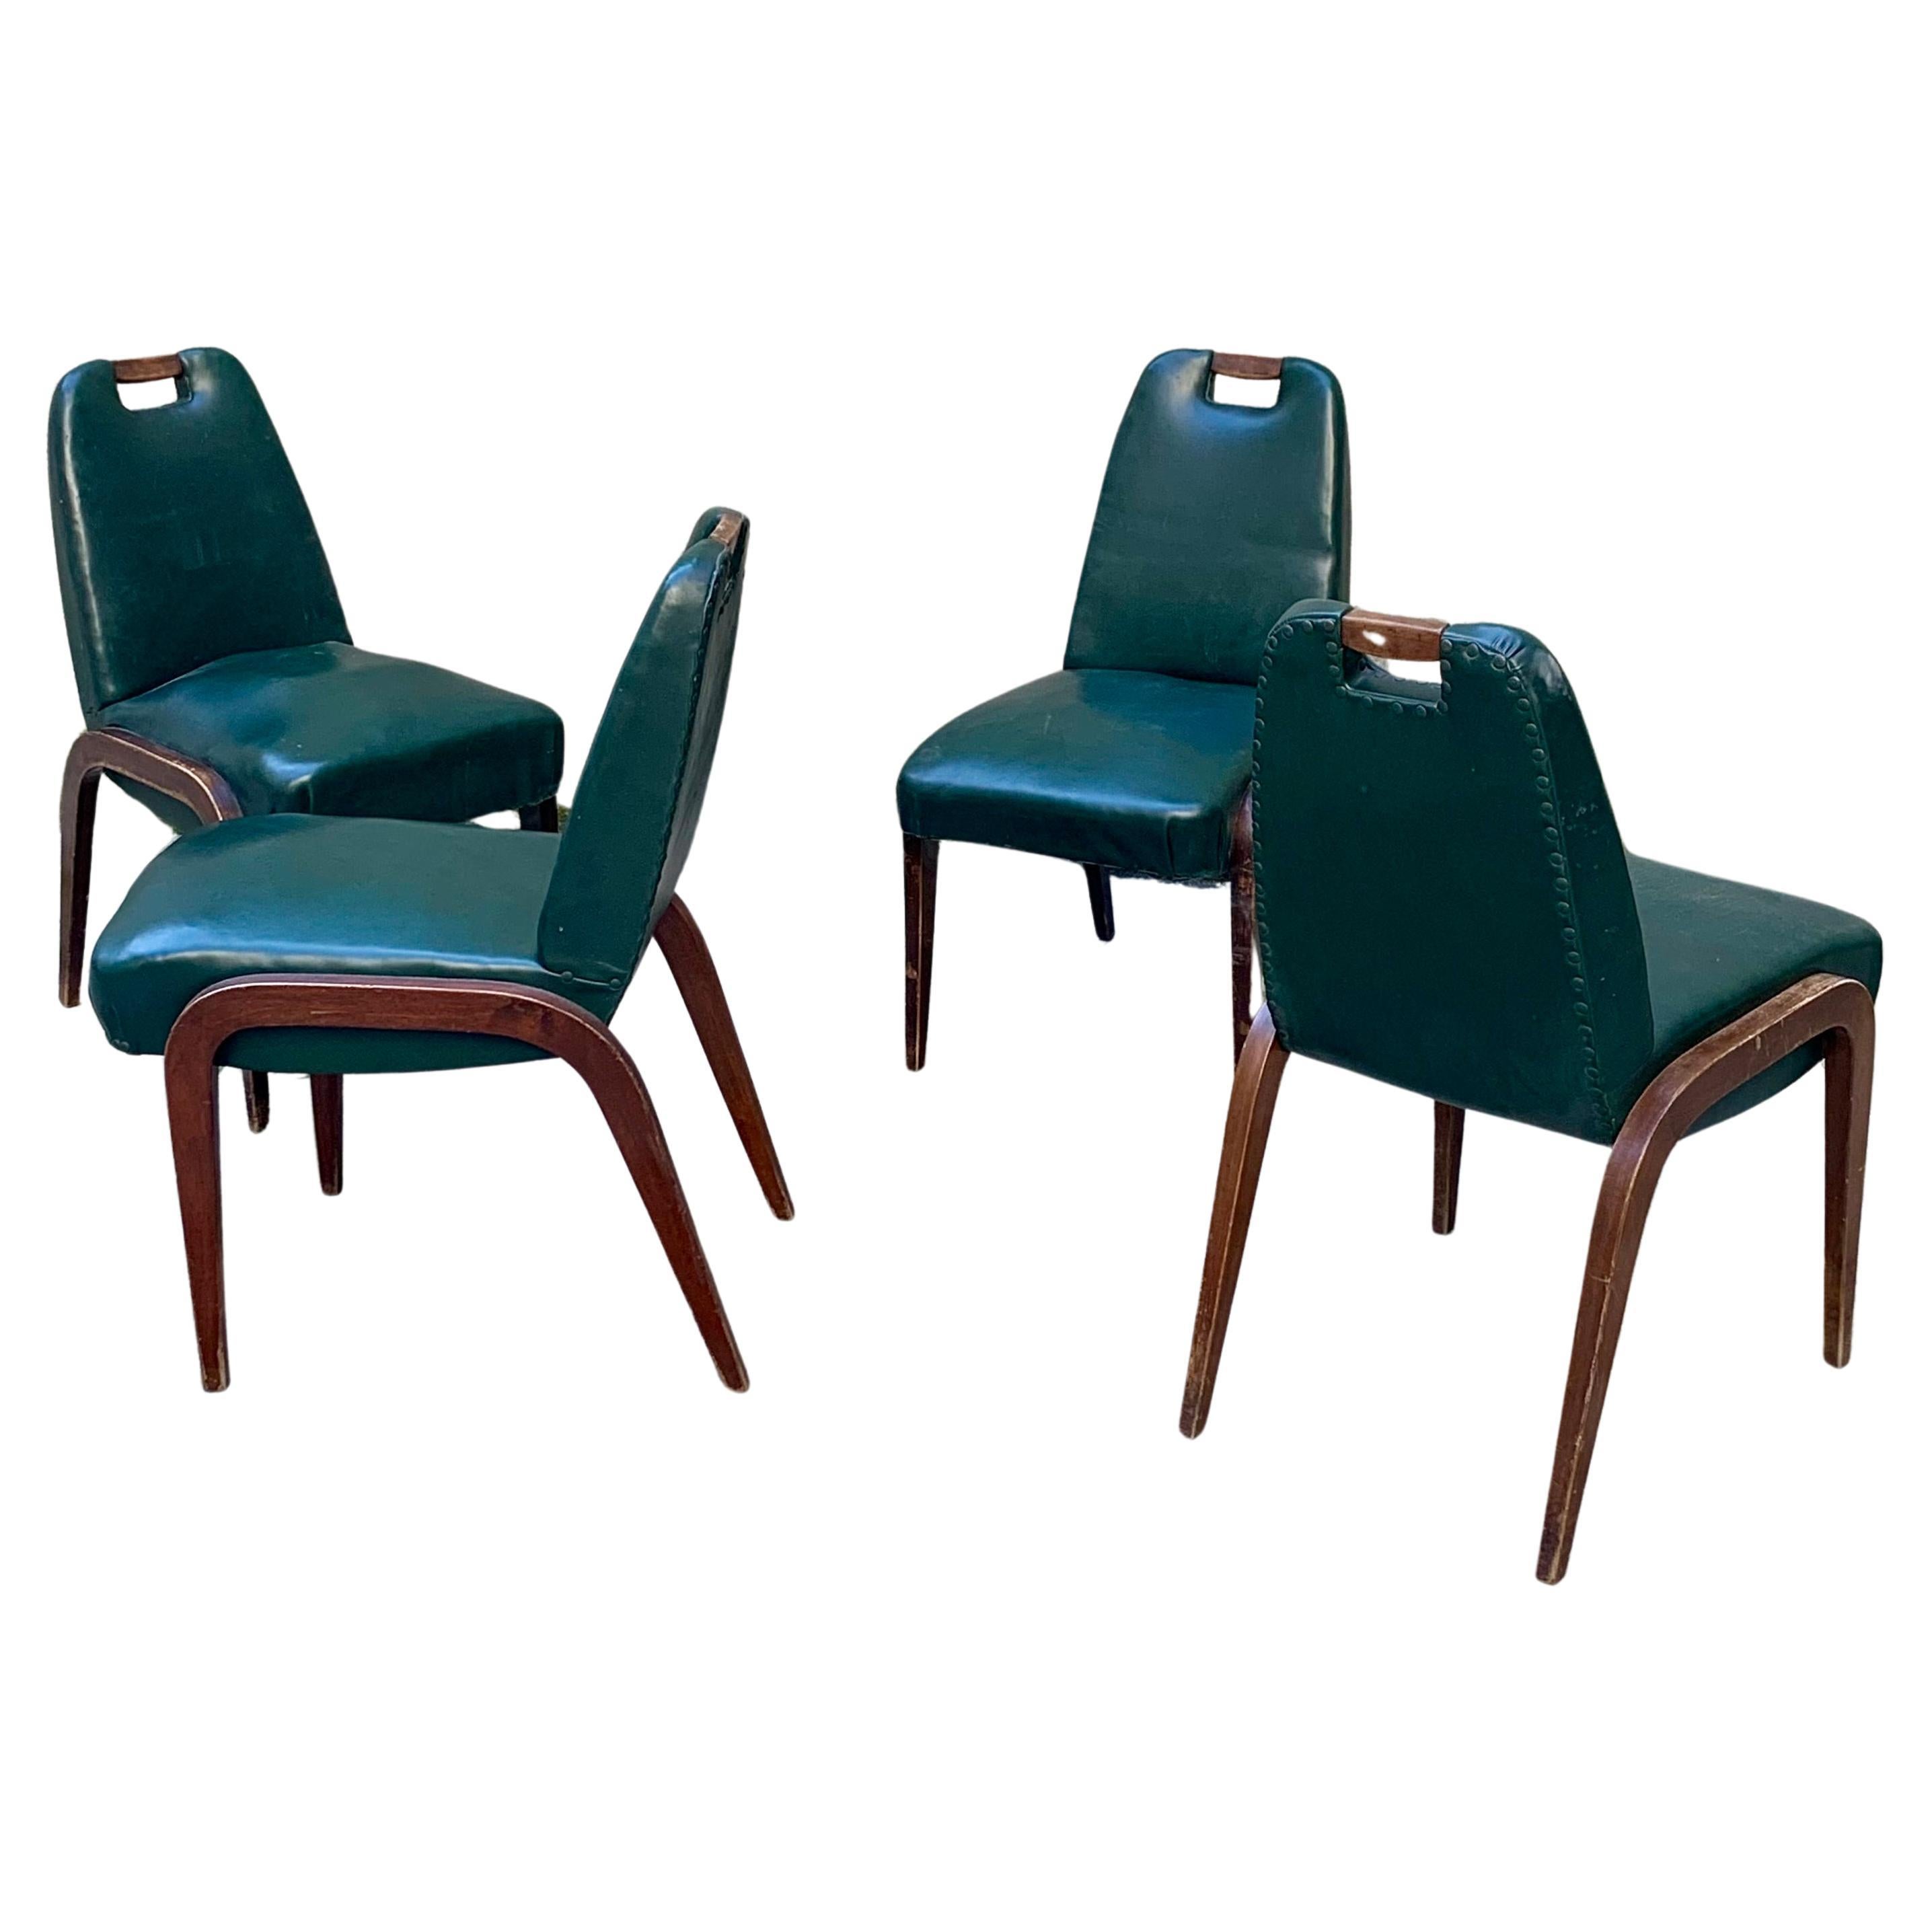 Set of 4 Wood and Leatherette Chairs - Italy - 1930s For Sale